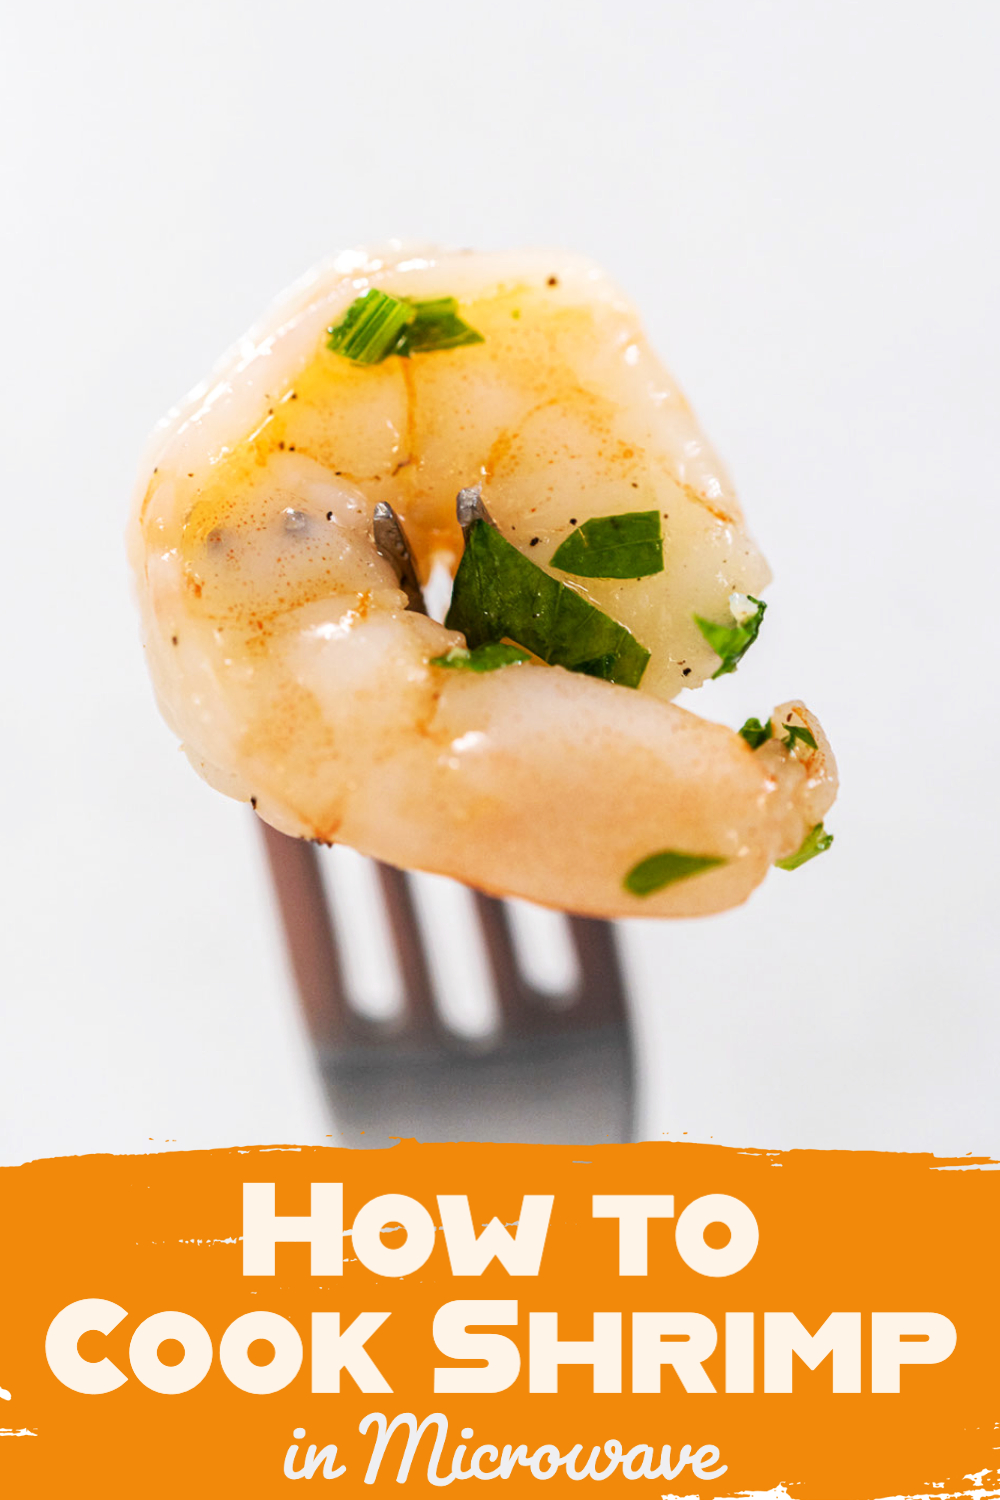 How to Cook Shrimp in Microwave